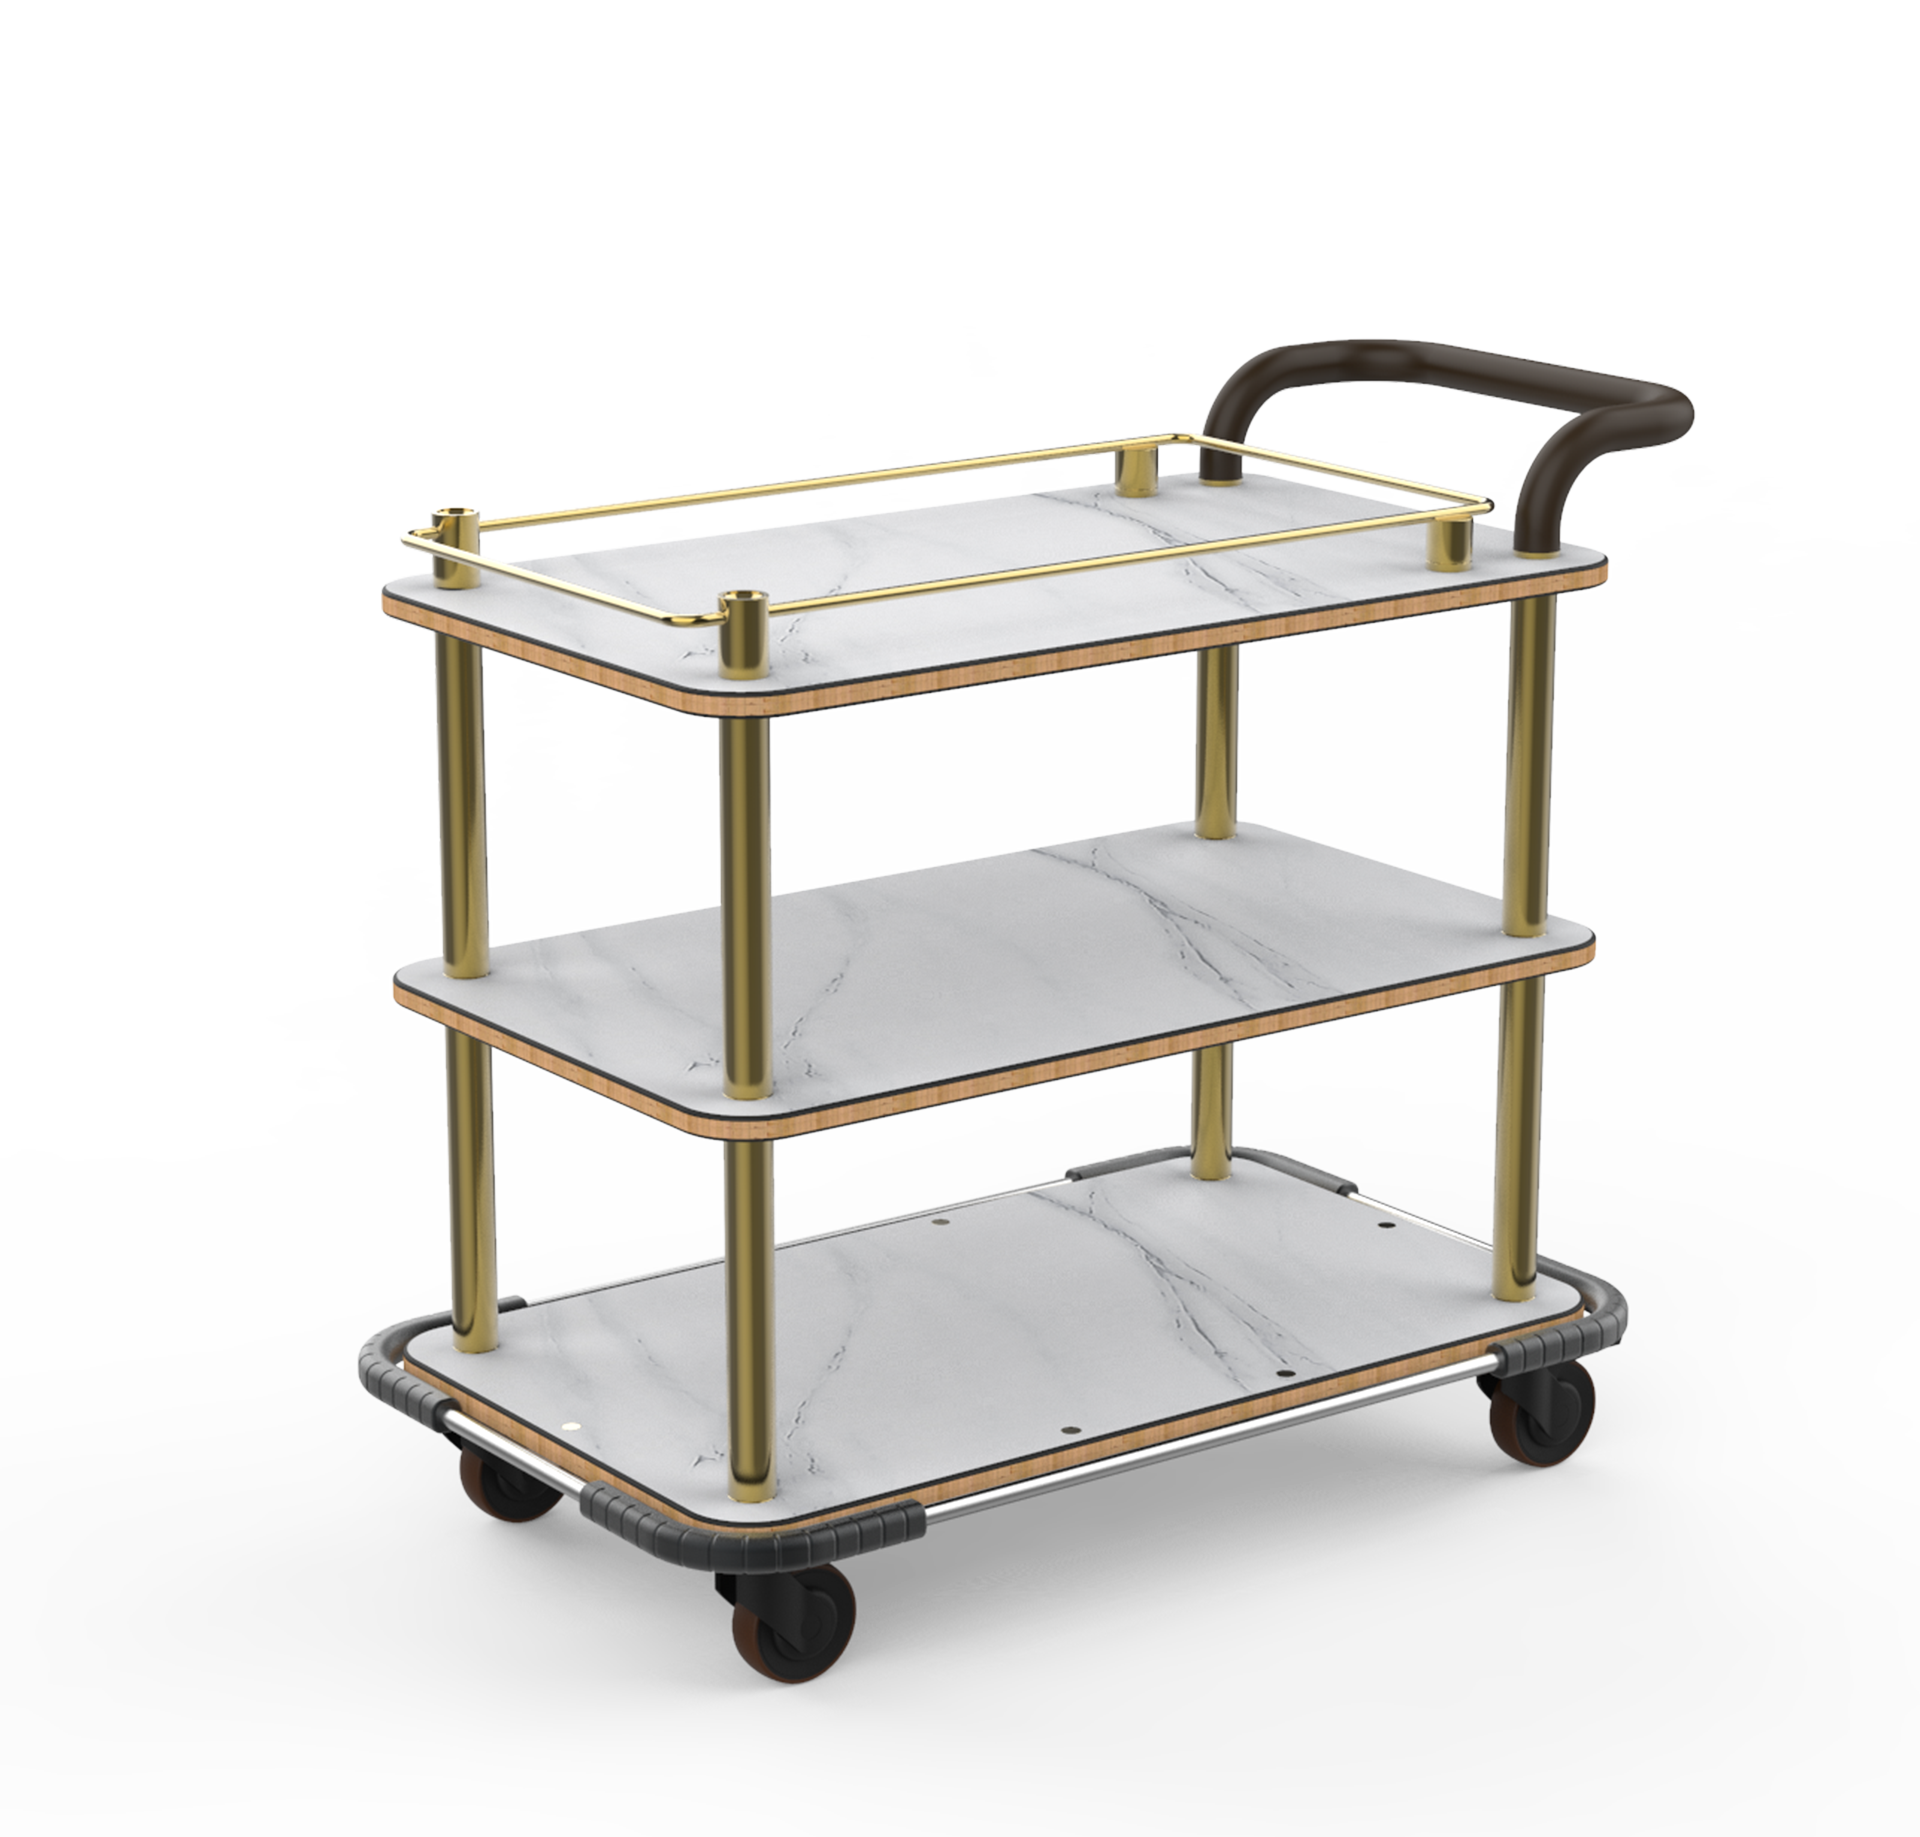 TOP BORDER CART WITH LEATHER HANDLE AND HEAVY DUTY BUMPER